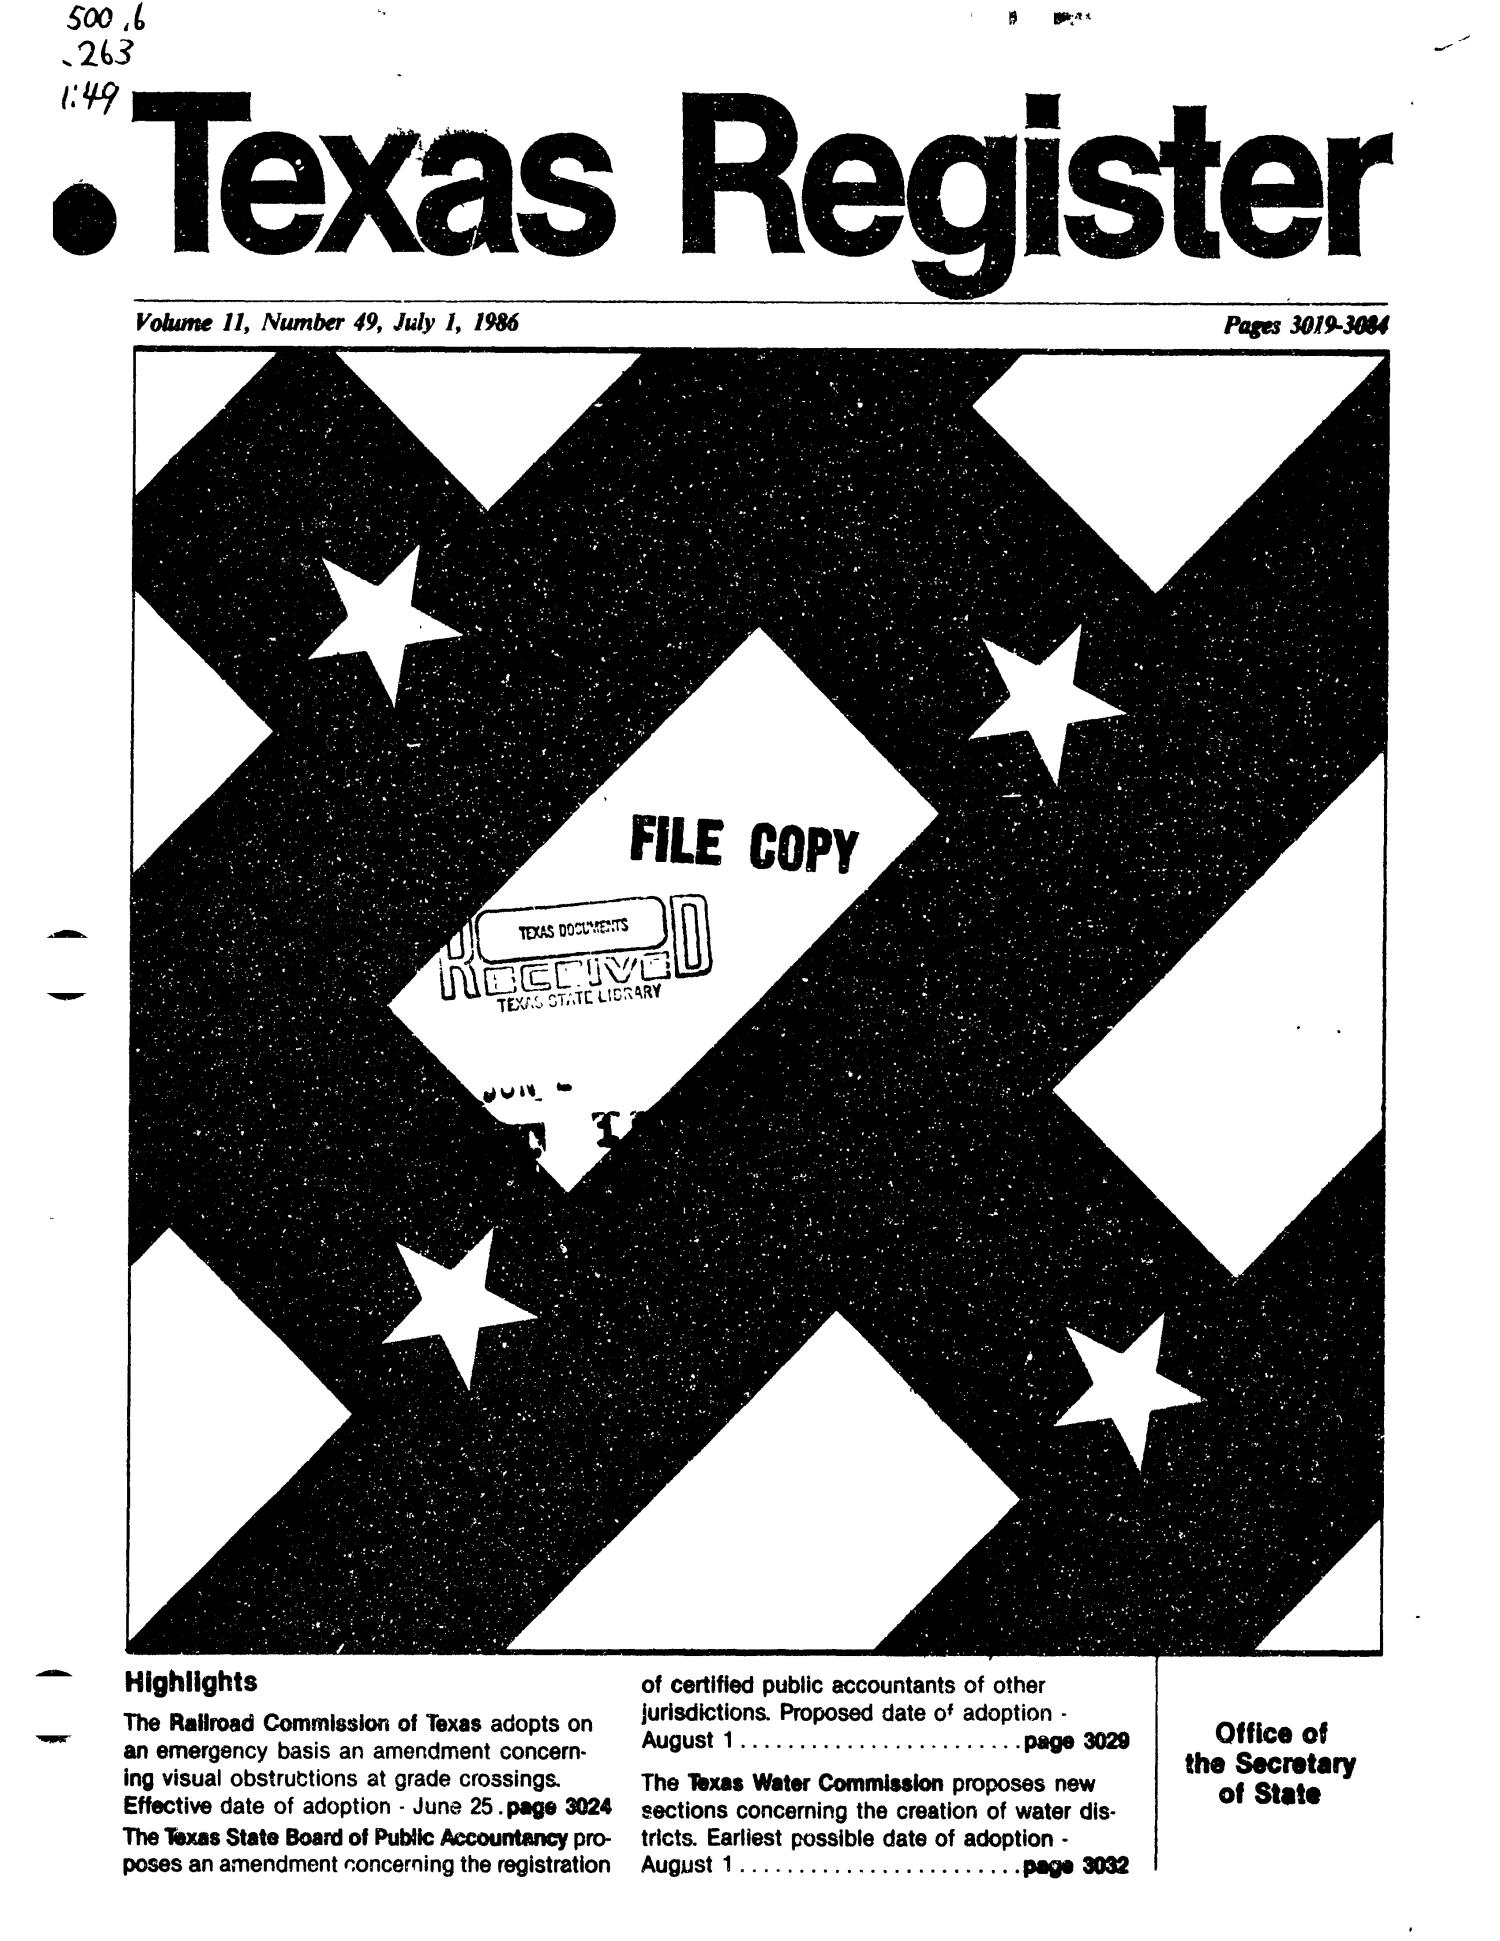 Texas Register, Volume 11, Number 49, Pages 3019-3084, July 1, 1986
                                                
                                                    Title Page
                                                